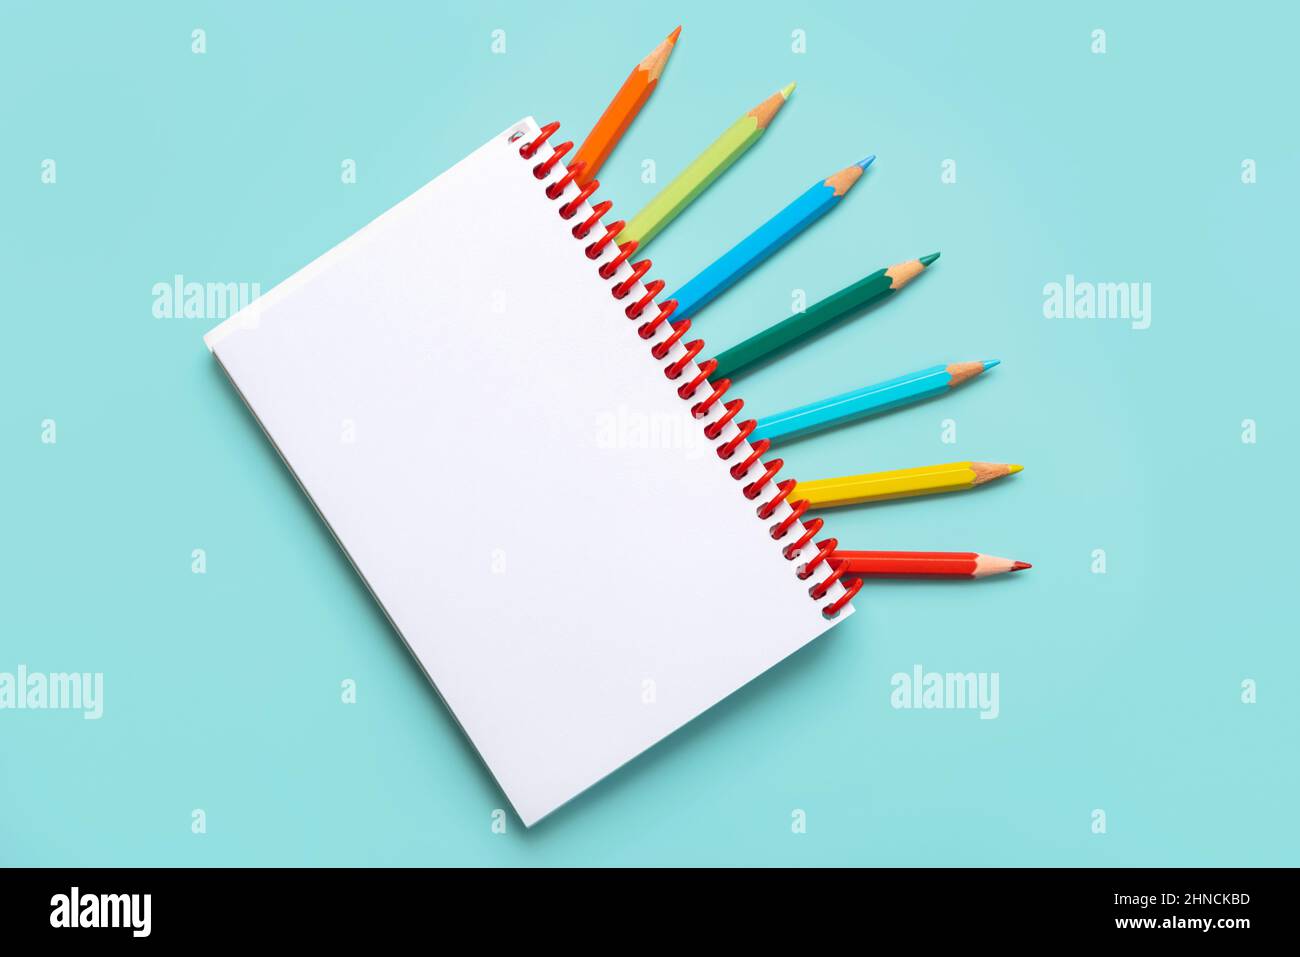 https://c8.alamy.com/comp/2HNCKBD/spiral-notebook-with-colored-pencils-and-with-copy-space-for-your-image-or-text-over-blue-background-2HNCKBD.jpg